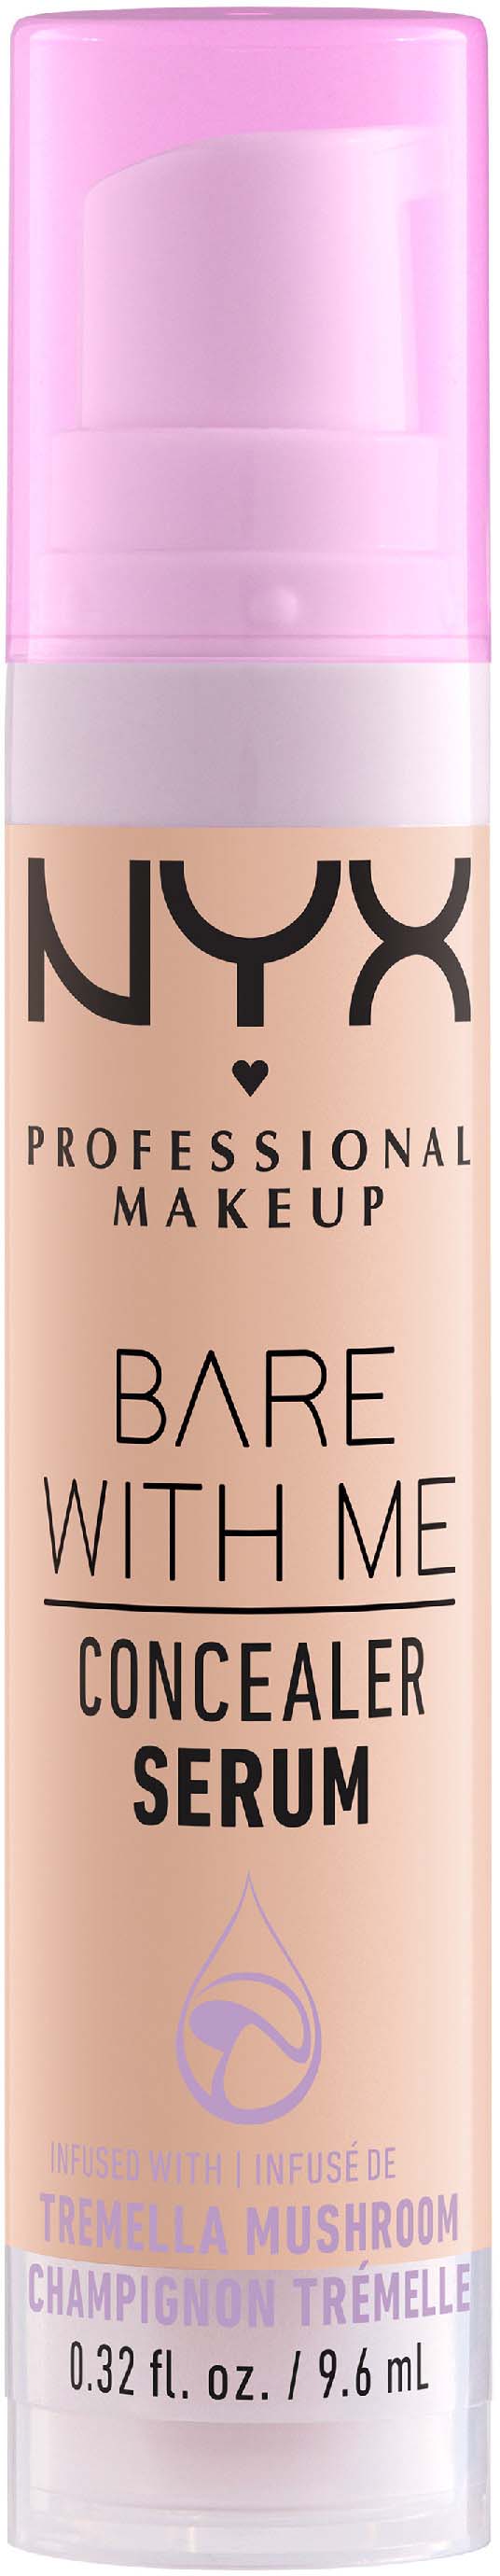 NYX PROFESSIONAL MAKEUP Concealer Serum With Light Me Bare